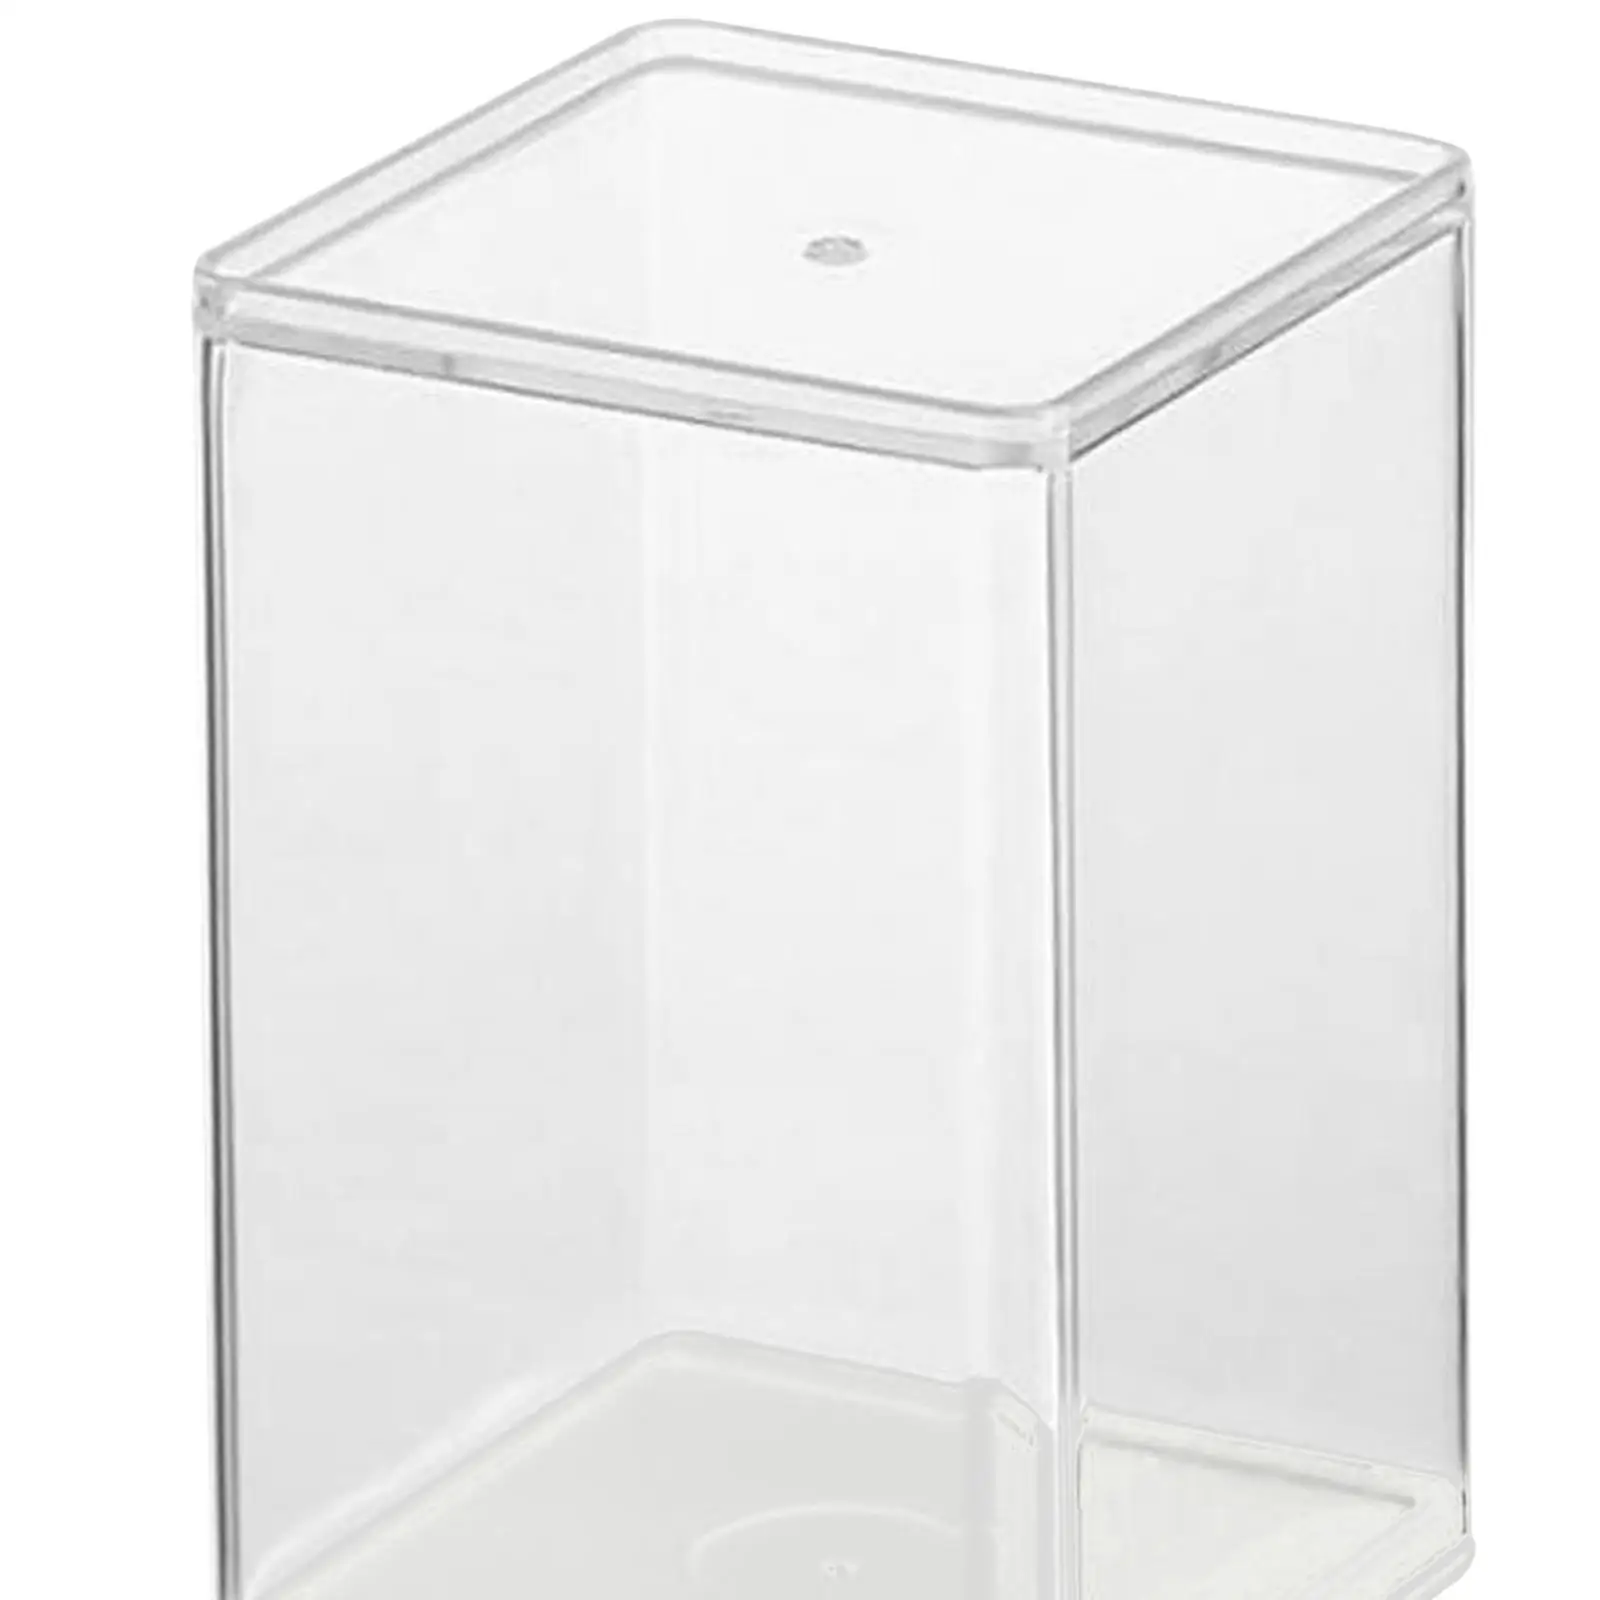 Acrylic Display Rack Case Dust Proof Stand Assemble Countertop Box Small Display Cabinet Storage Box for Model Dolls Toys Kids